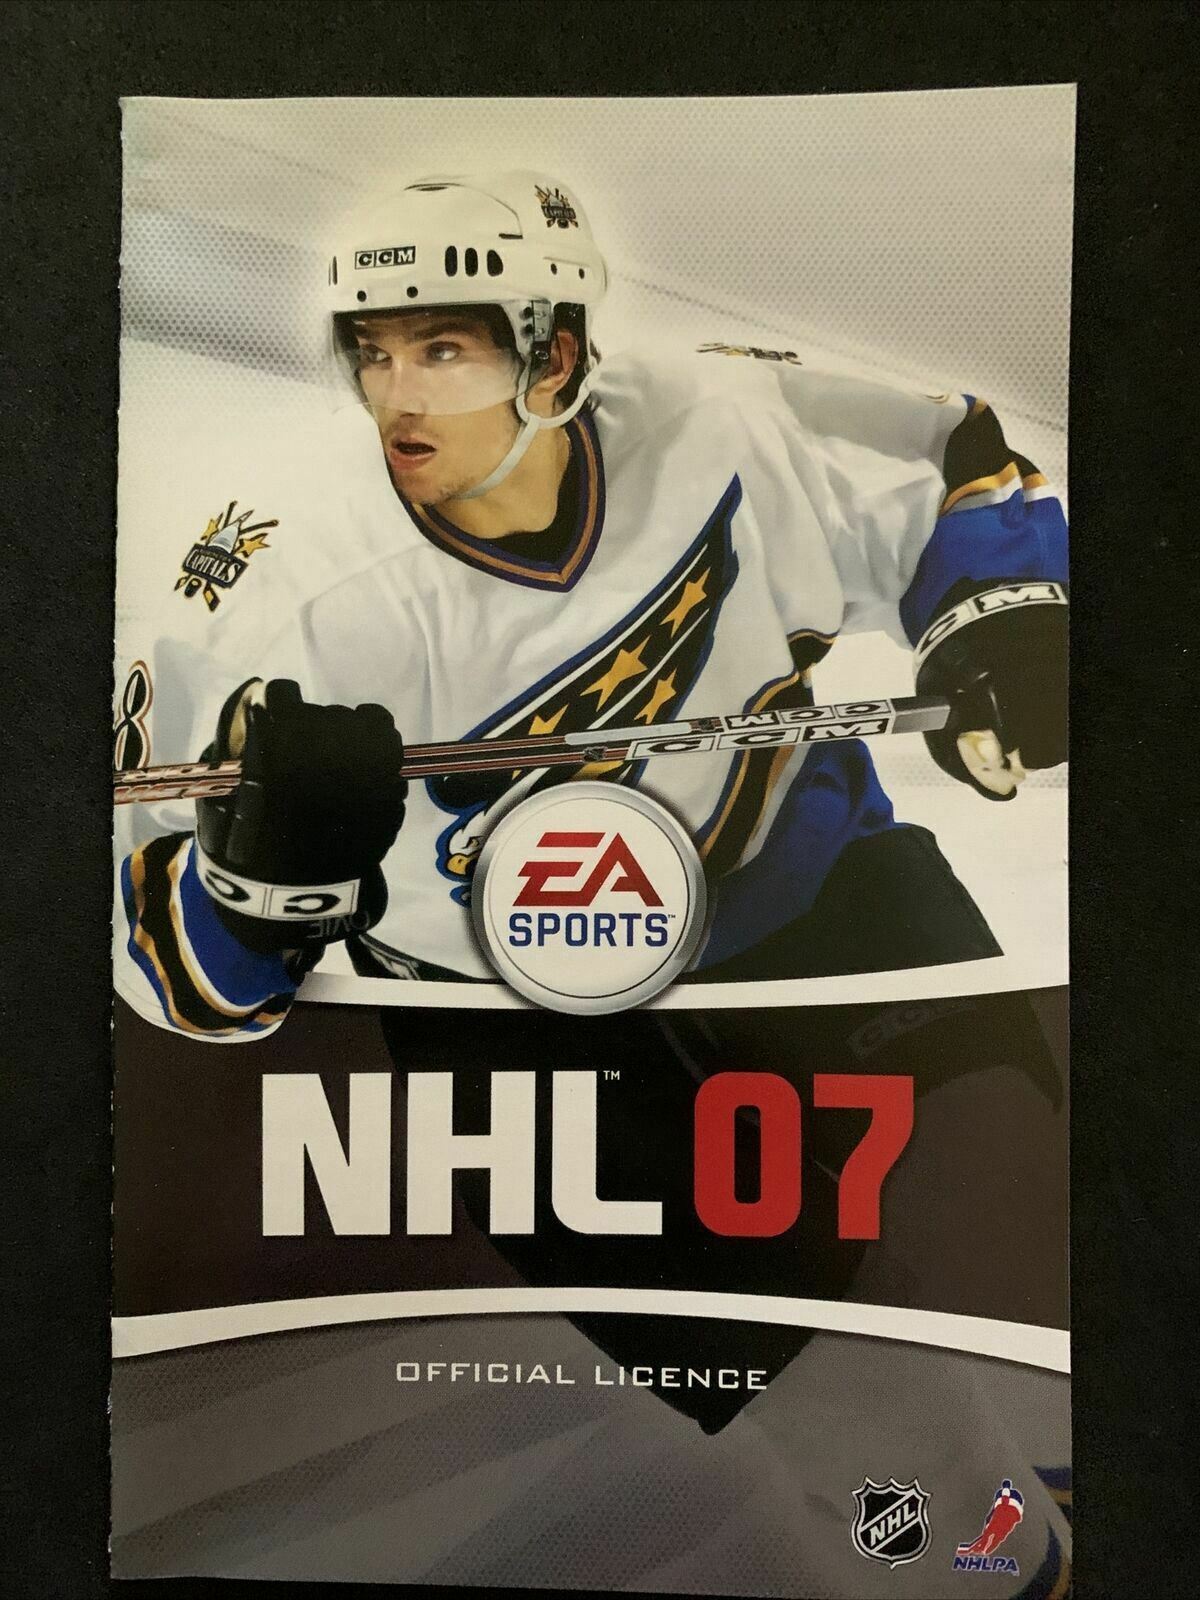 NHL 07 - PlayStation PS2 PAL Ice Hockey Game with Manual